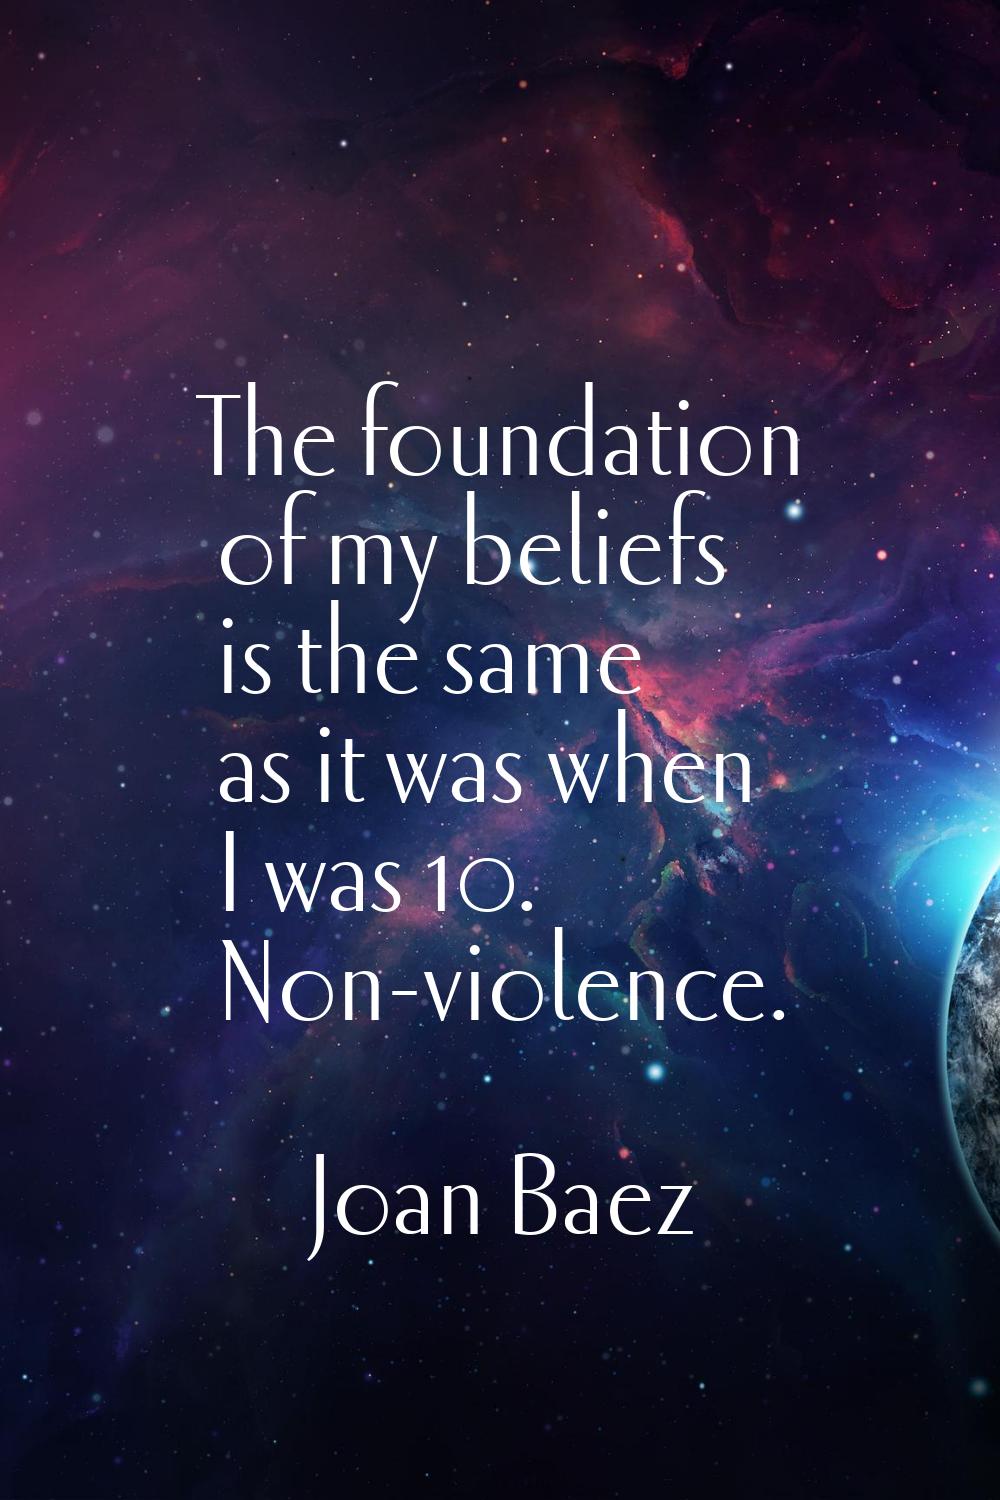 The foundation of my beliefs is the same as it was when I was 10. Non-violence.